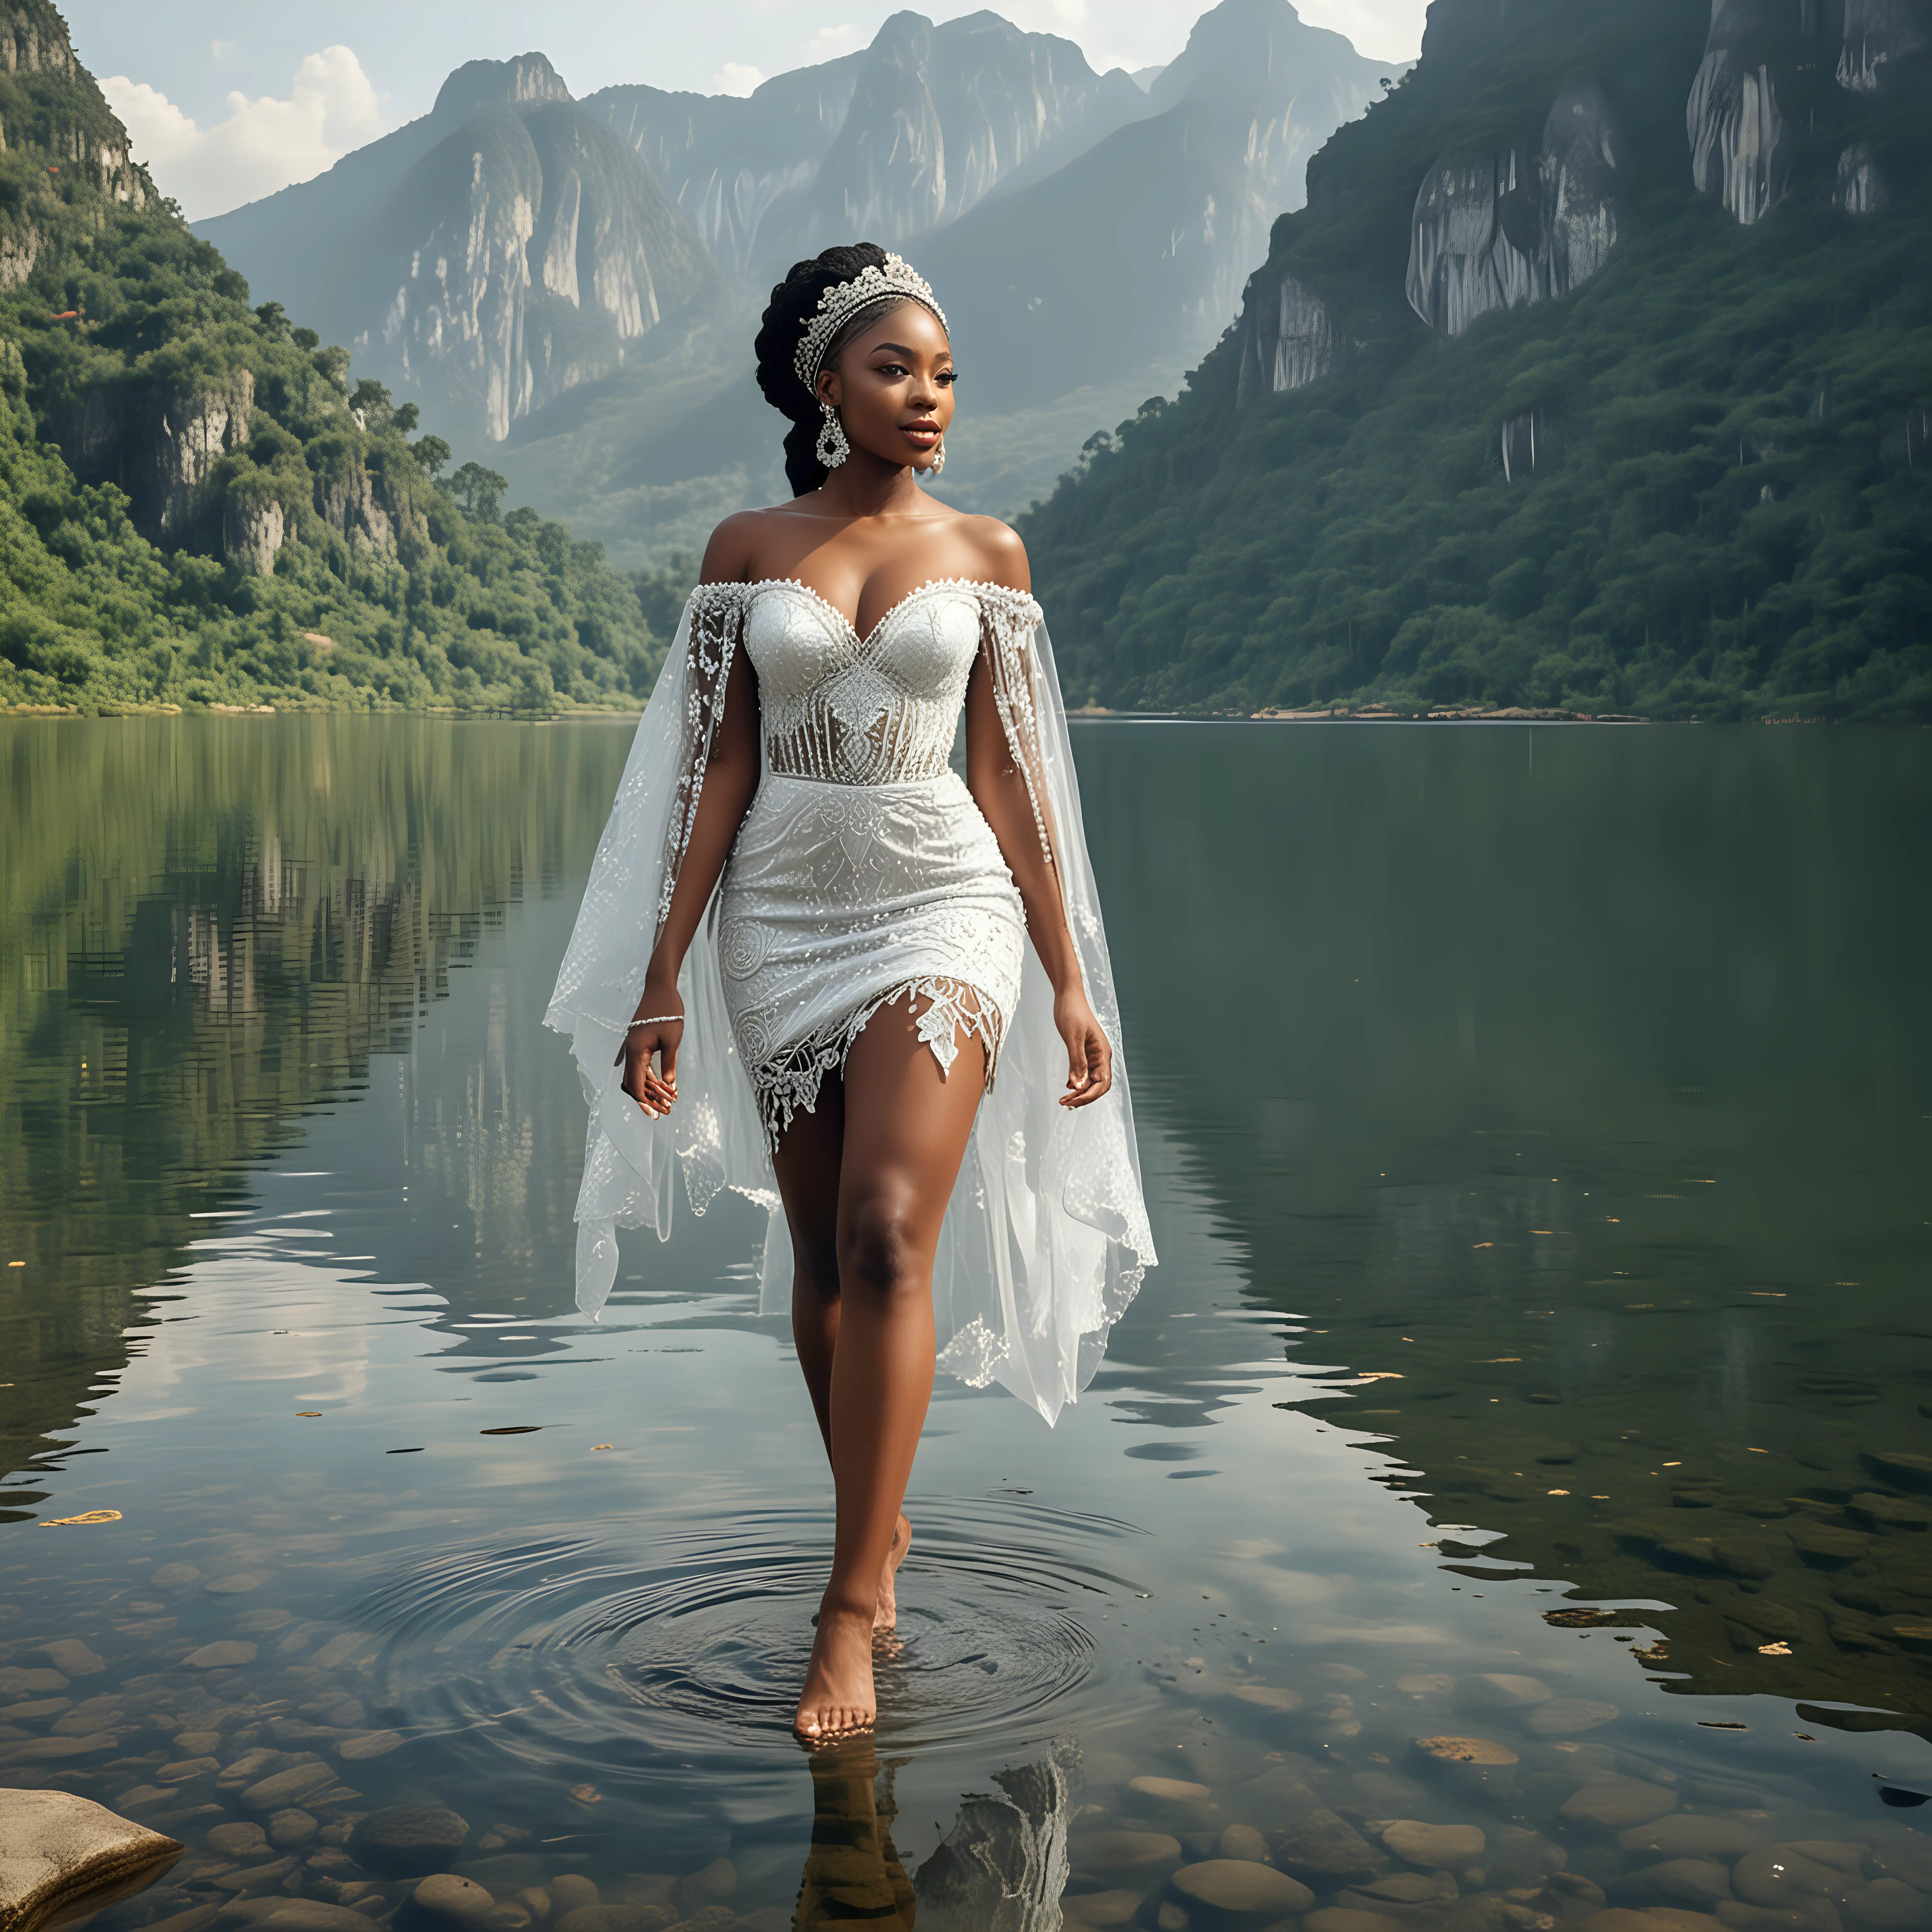 In a very realistic way, a sublime Nigeria beauty  pagent  in crystal, walking on a lake, amidst the mountains